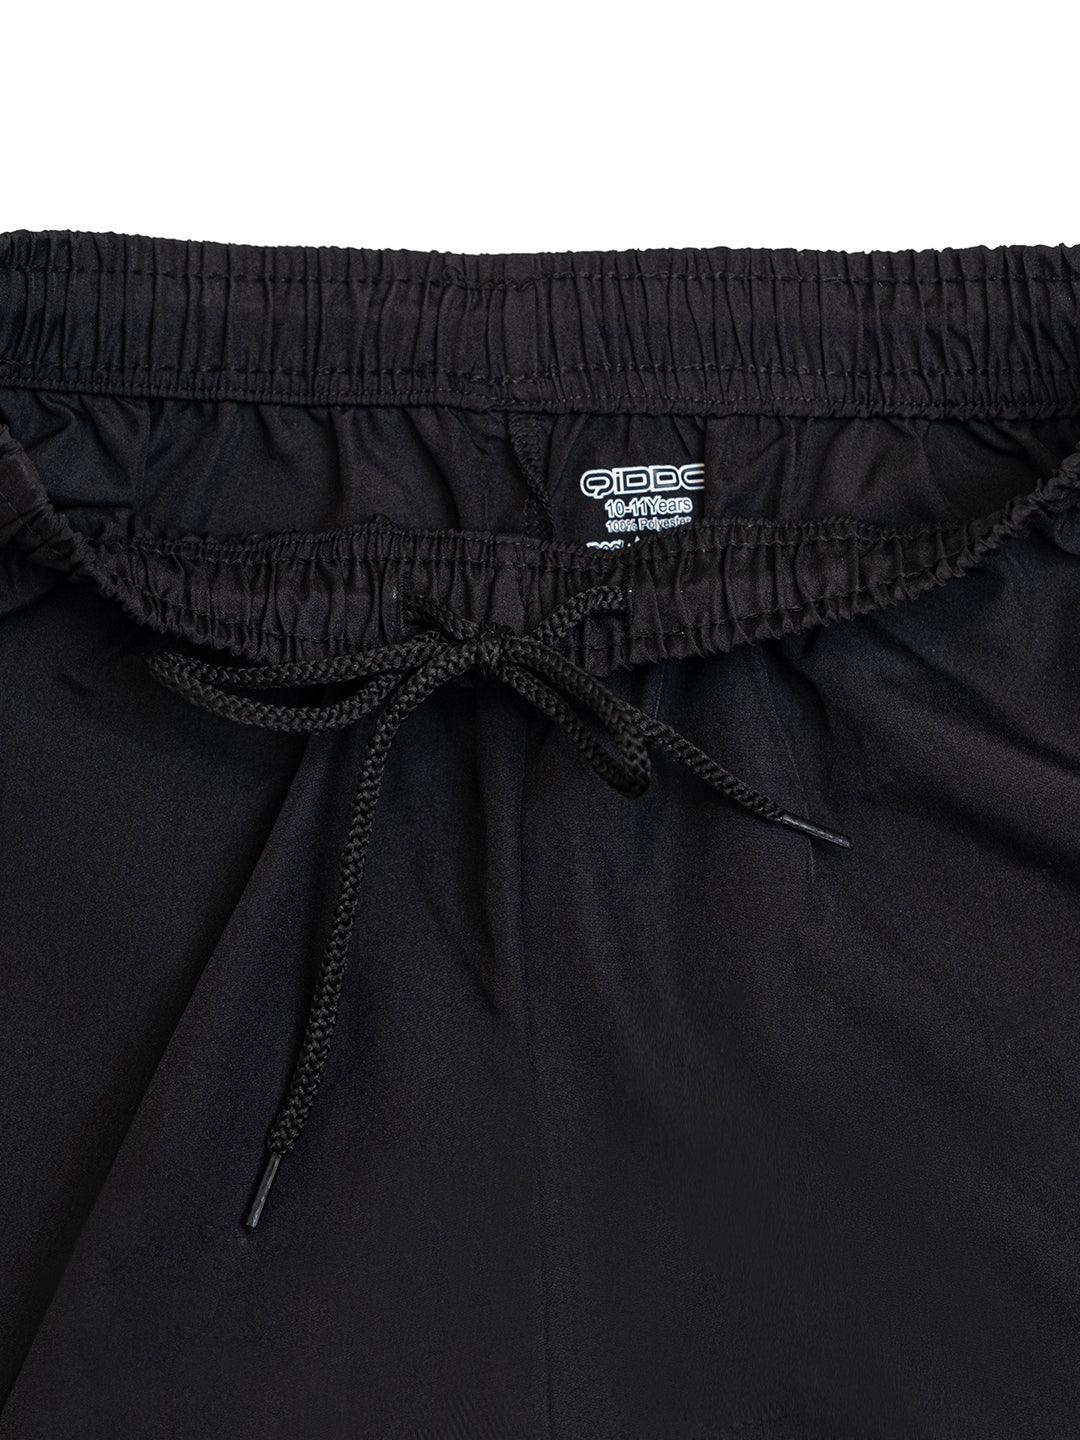 Solid Shorts with Design strip